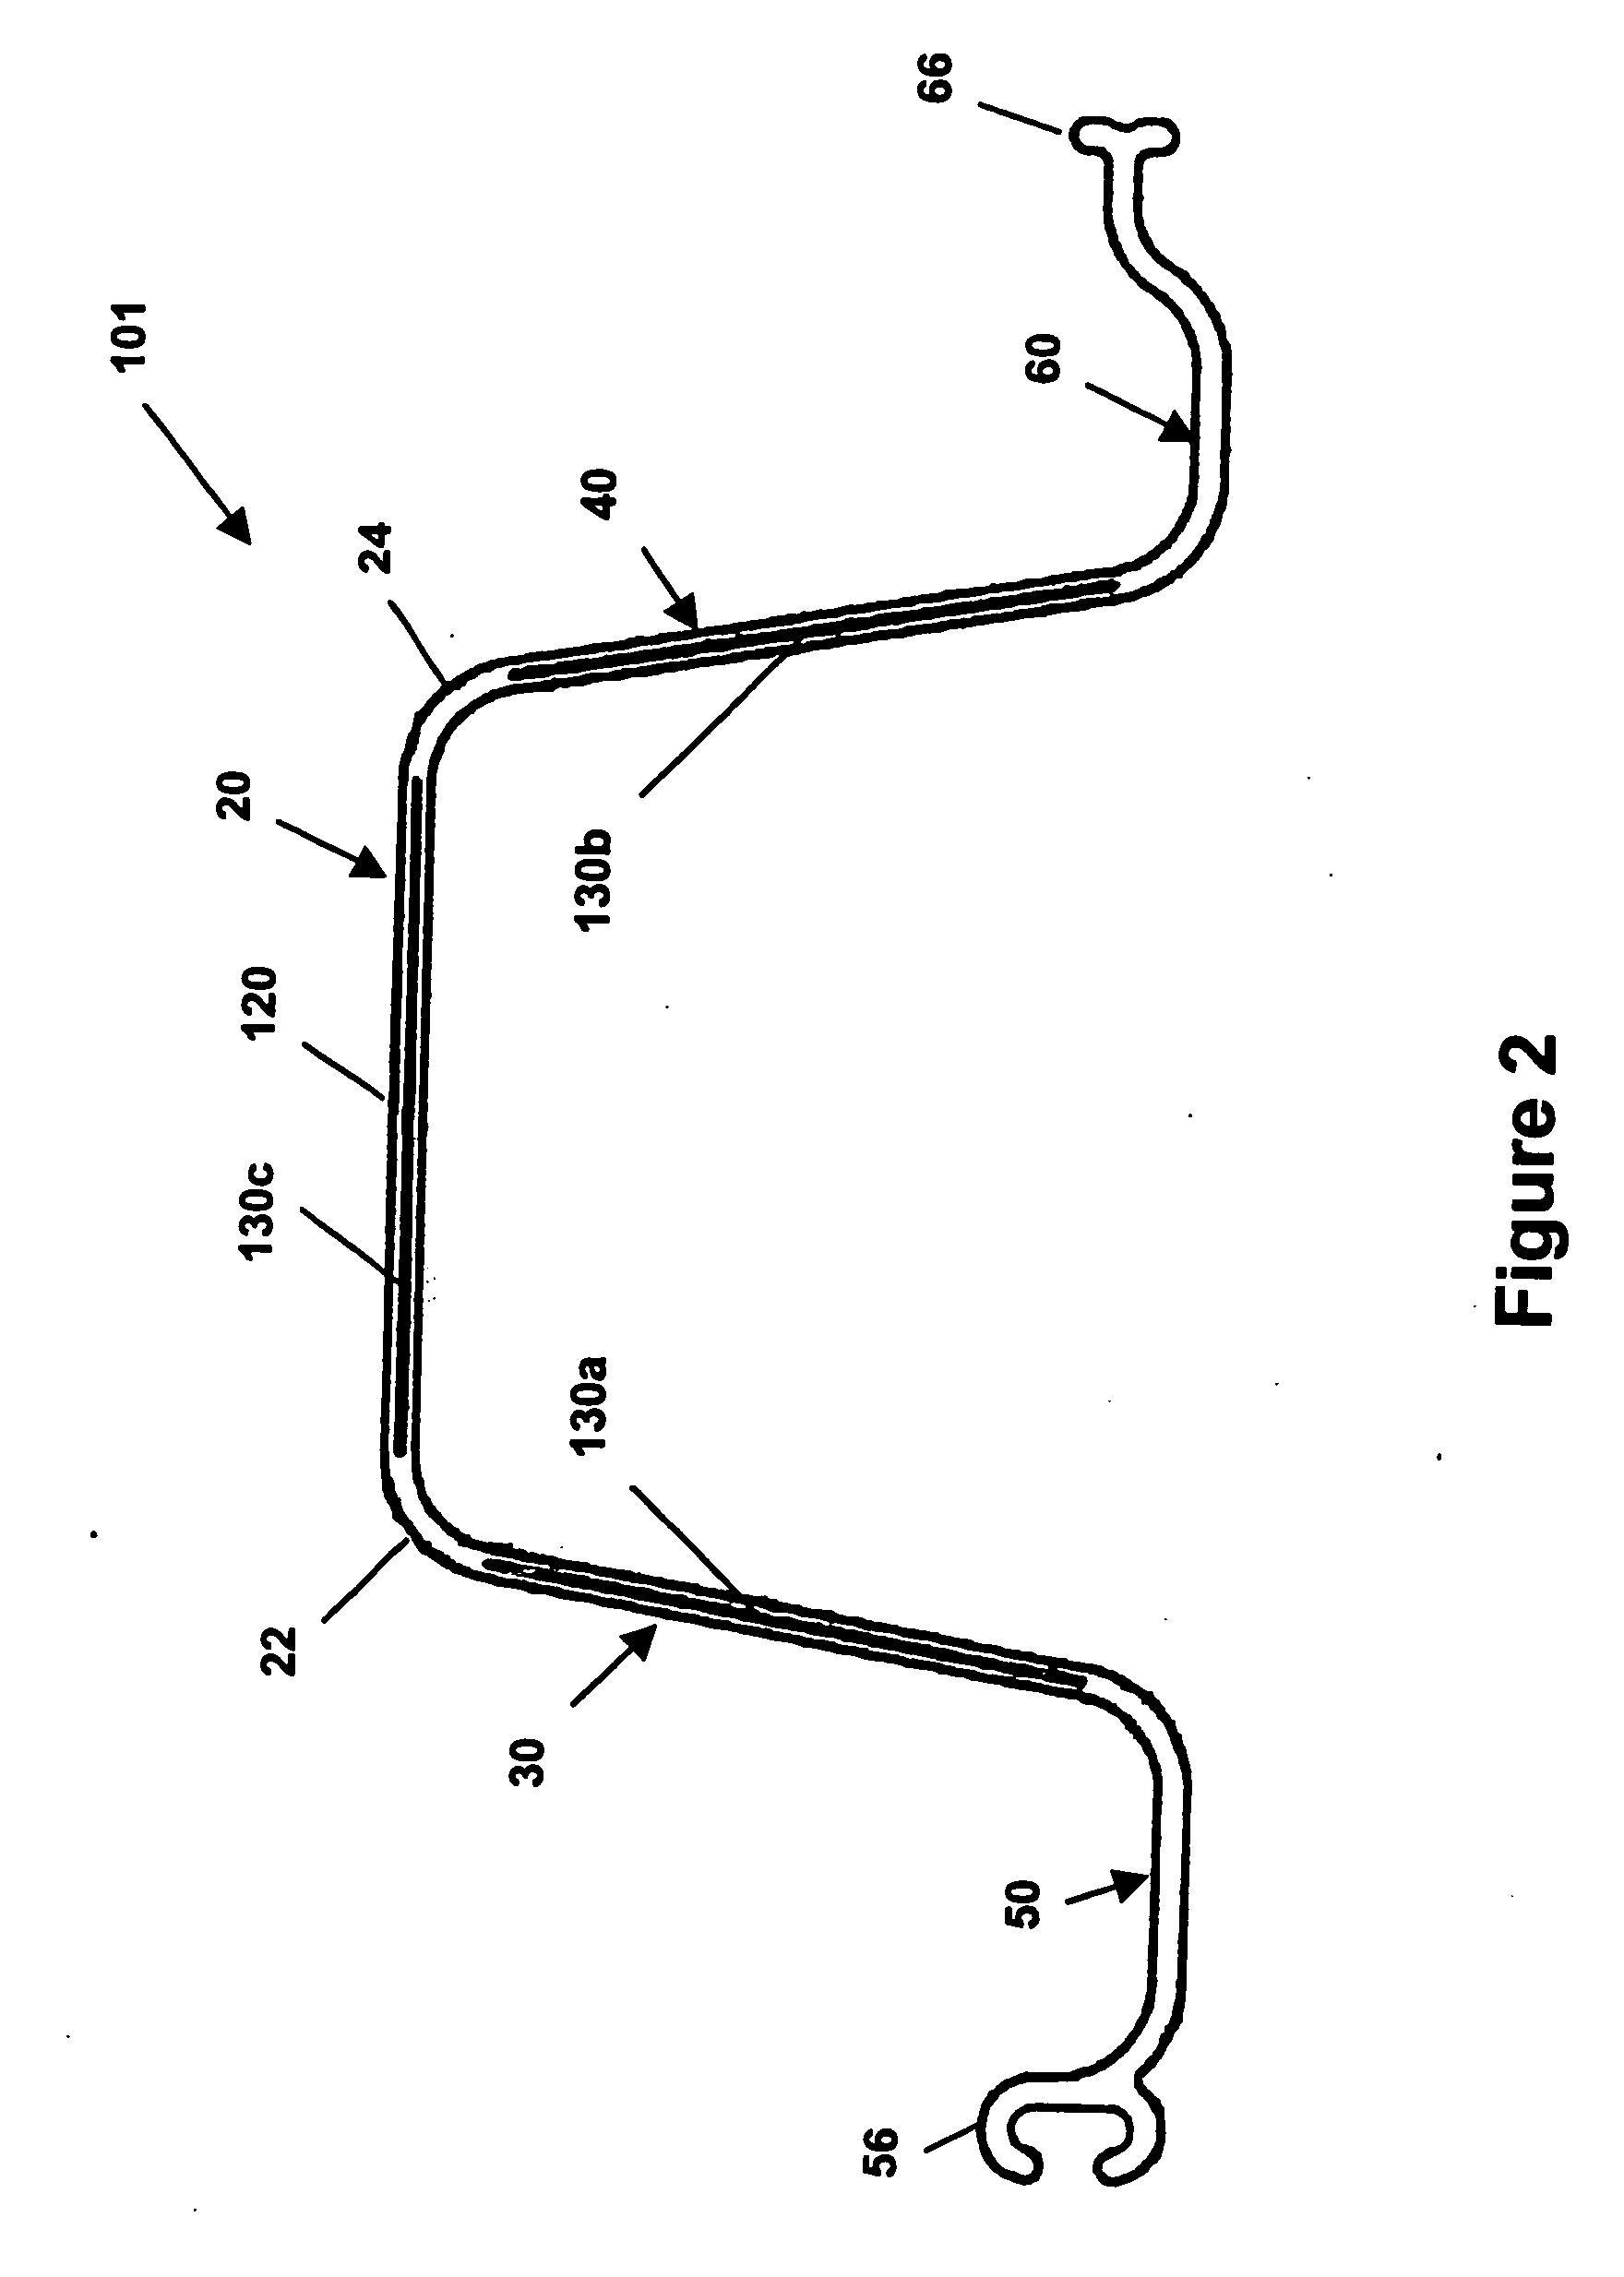 Method of manufacturing a metal-reinforced plastic panel